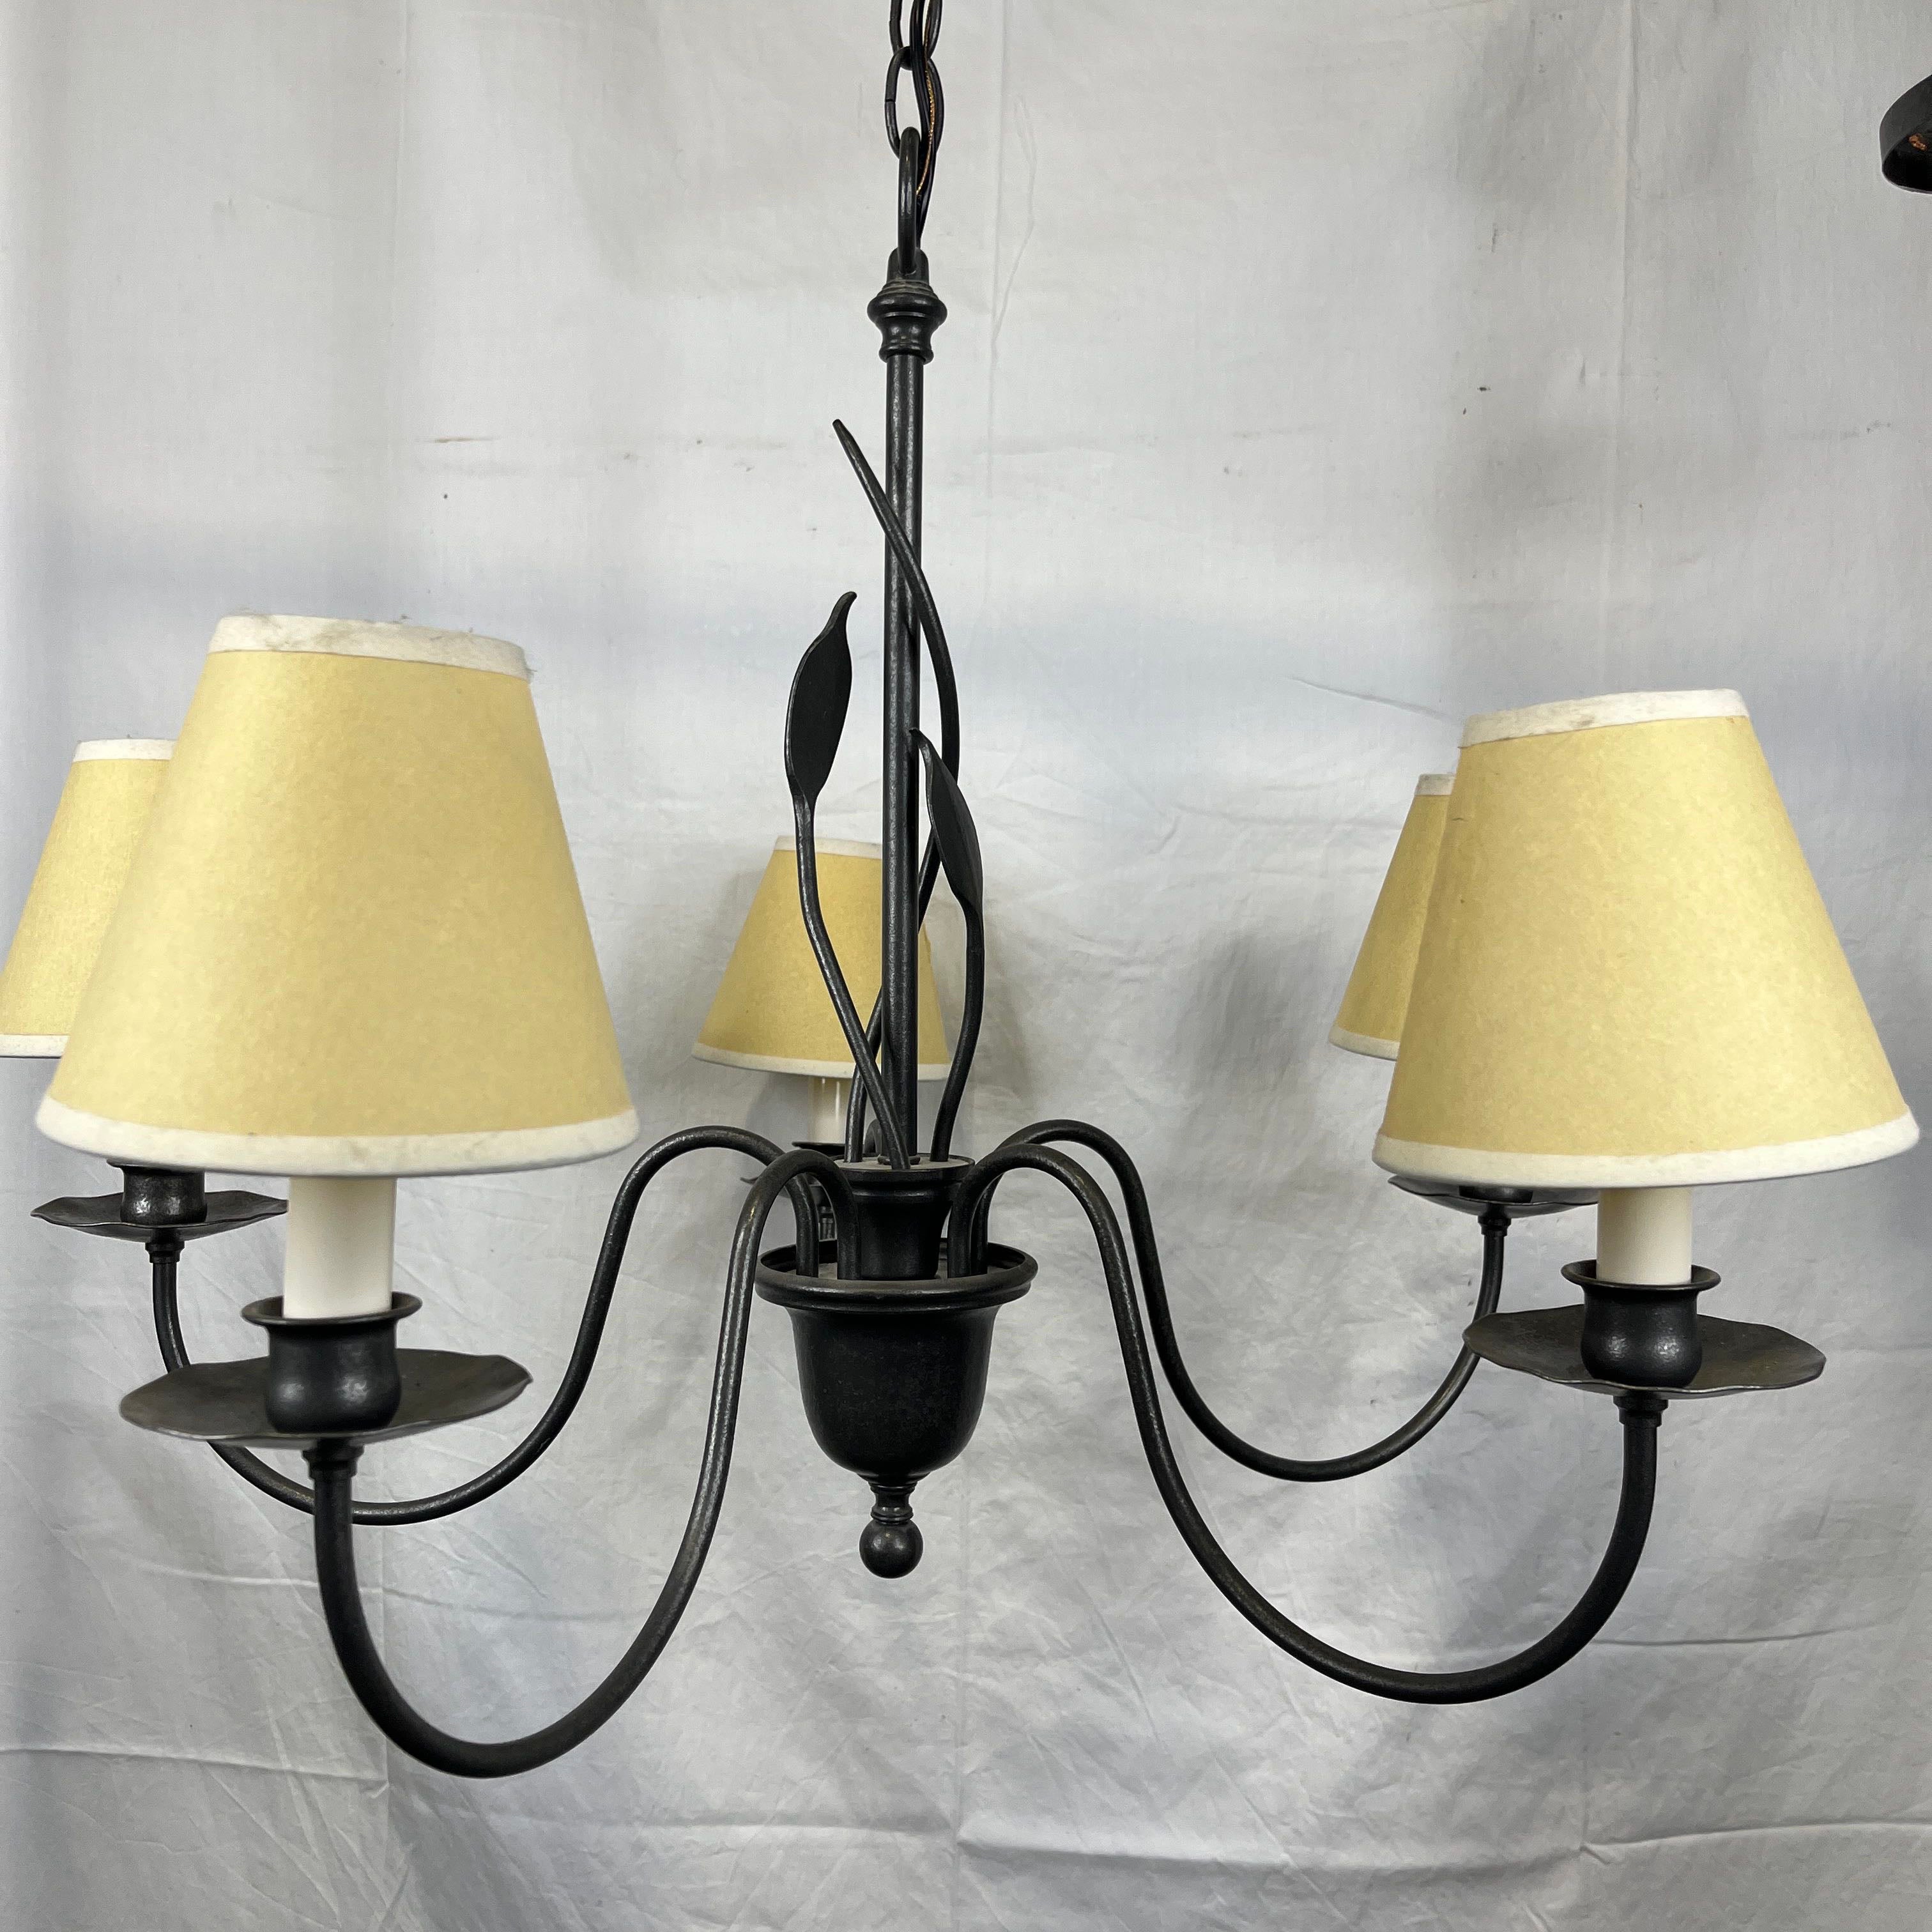 Hubbardton Forge Forged Leaves 5-Light Wrought Iron Candelabra Style Chandelier